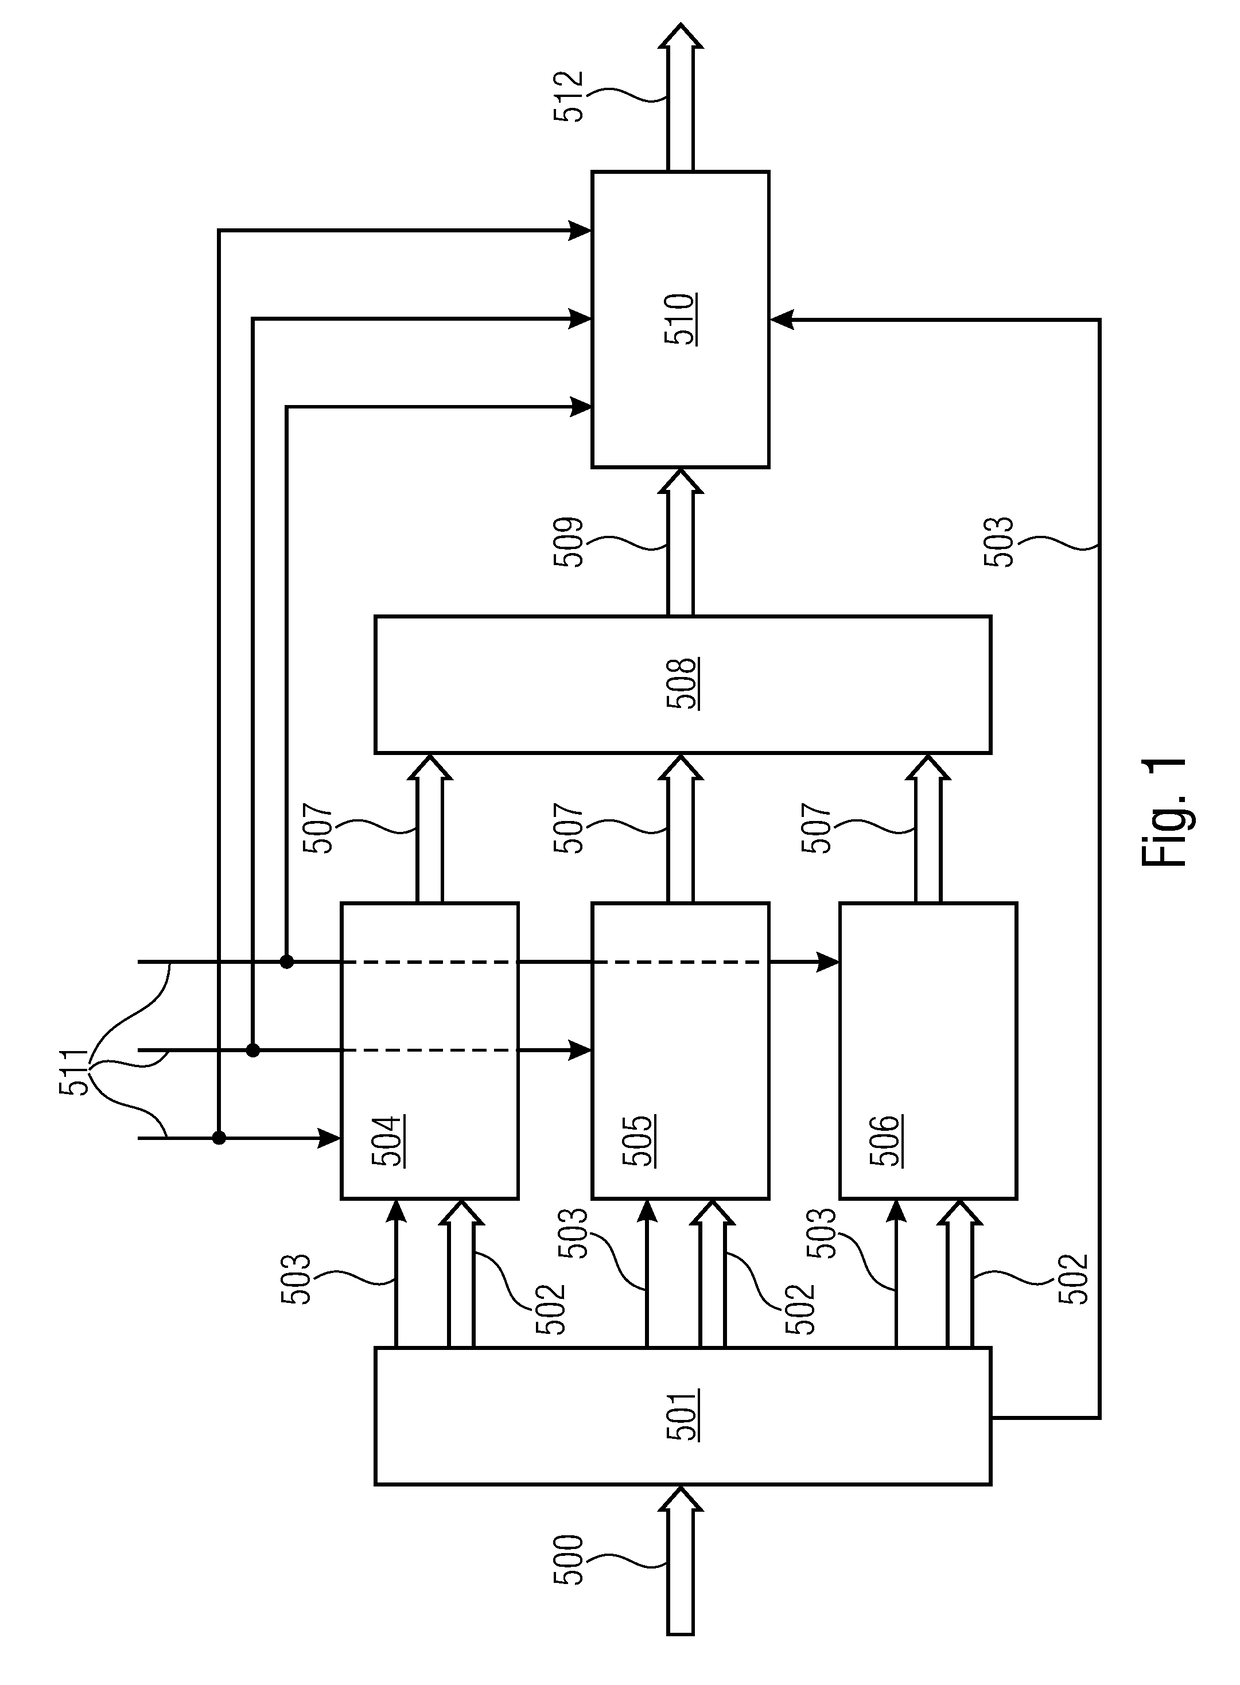 Loudness control for user interactivity in audio coding systems